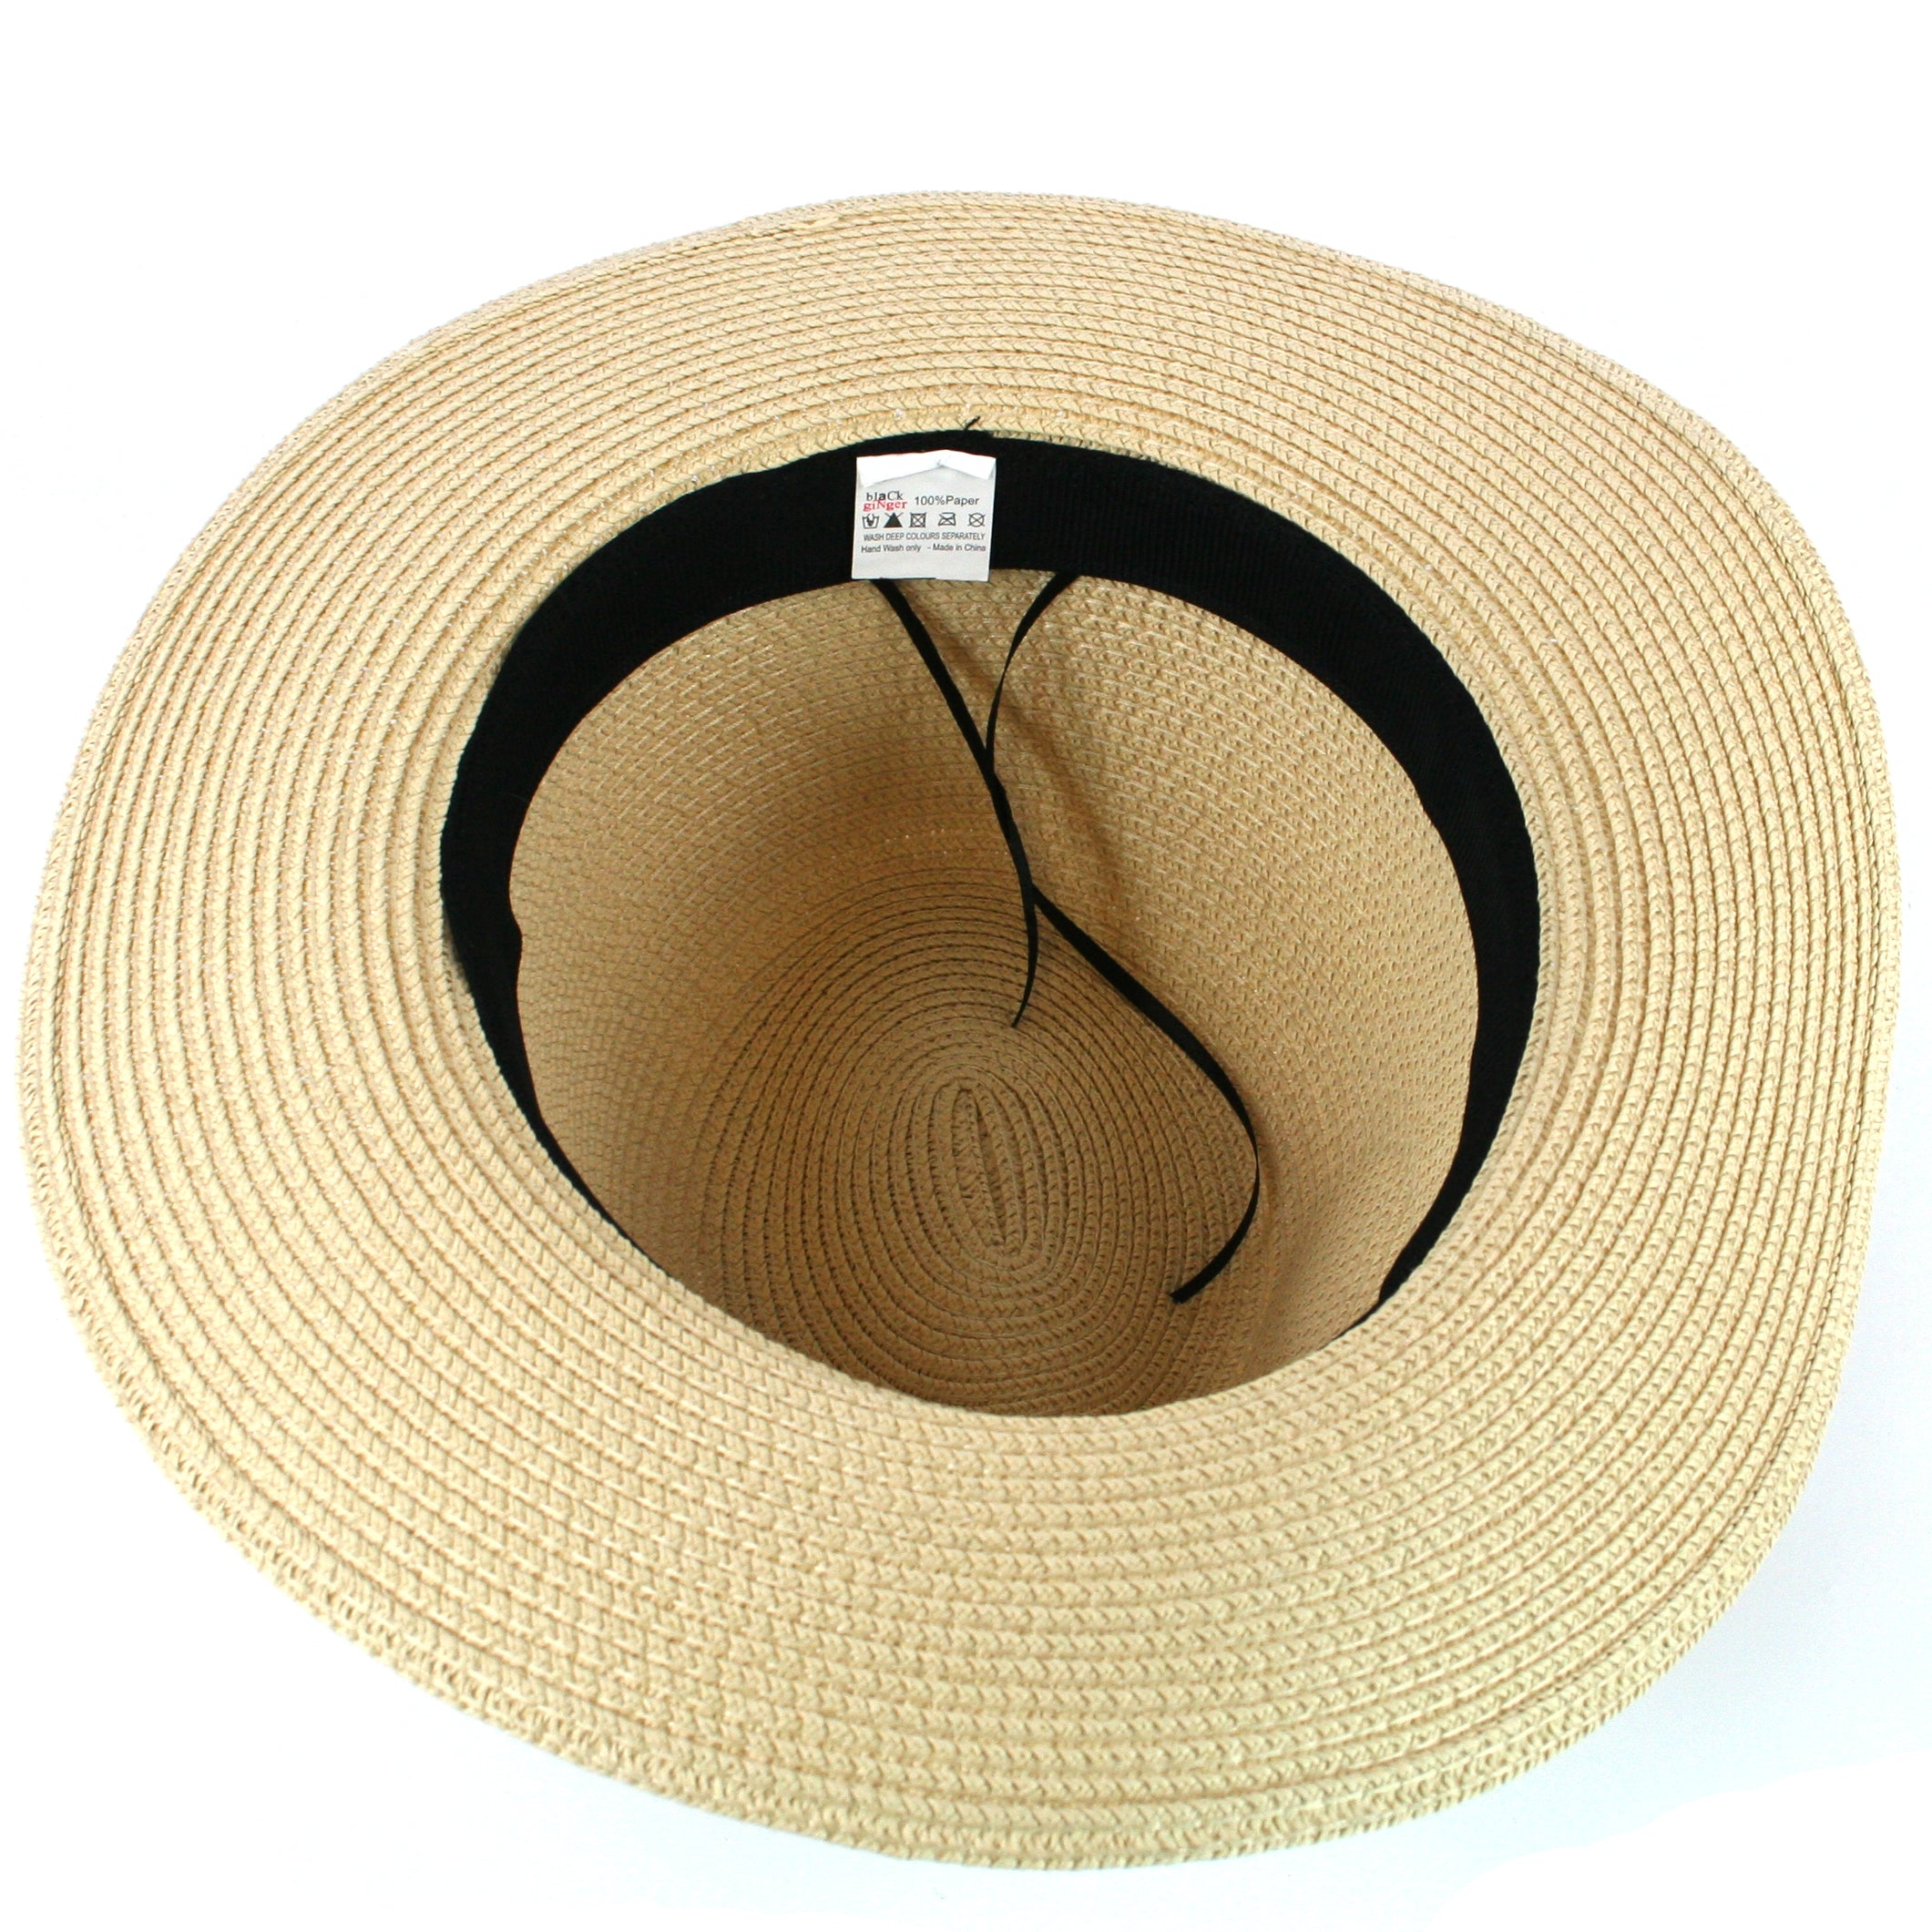 The inside of the folding sun hat.  it shows the soft inner brim. it also shows that there is a ribbon cord that allows the wearer to adjust the size for a more comfortable fit